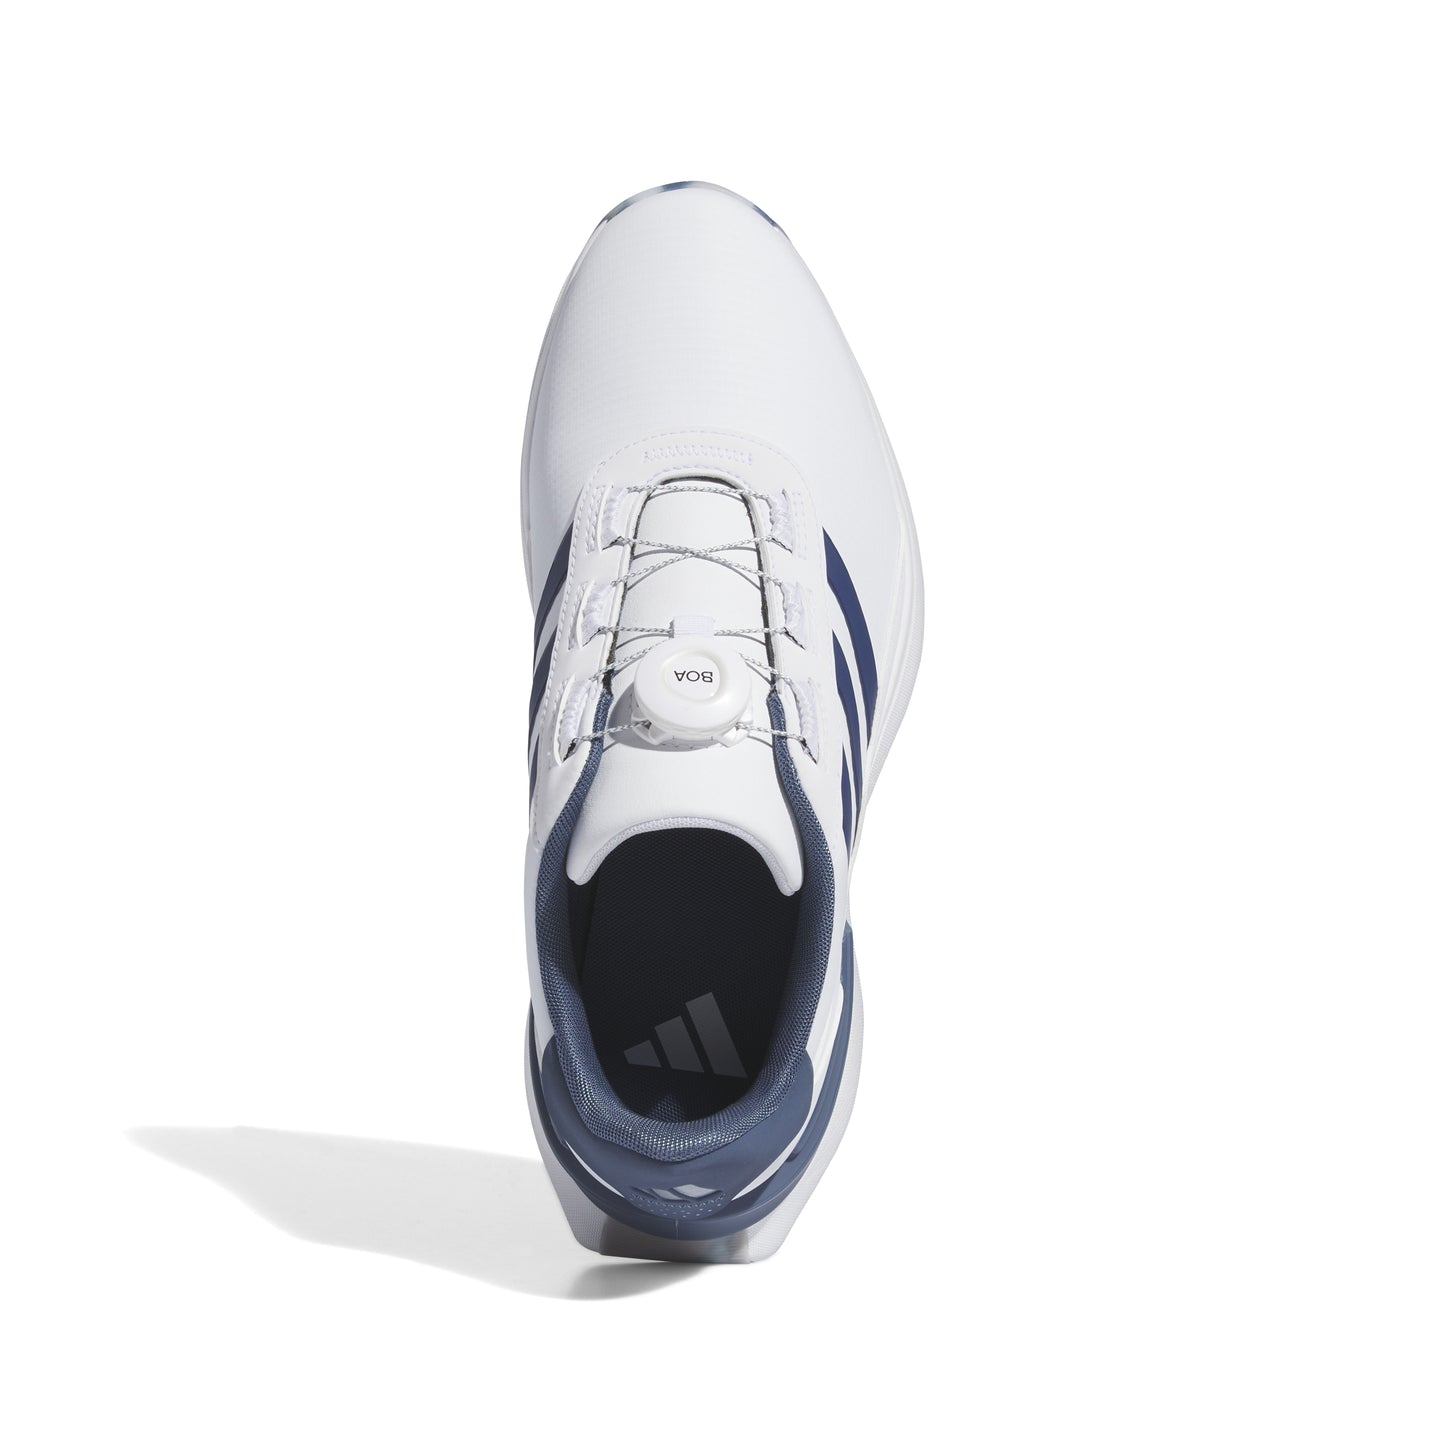 ADIDAS S2G 24 WIDE GOLF SHOES